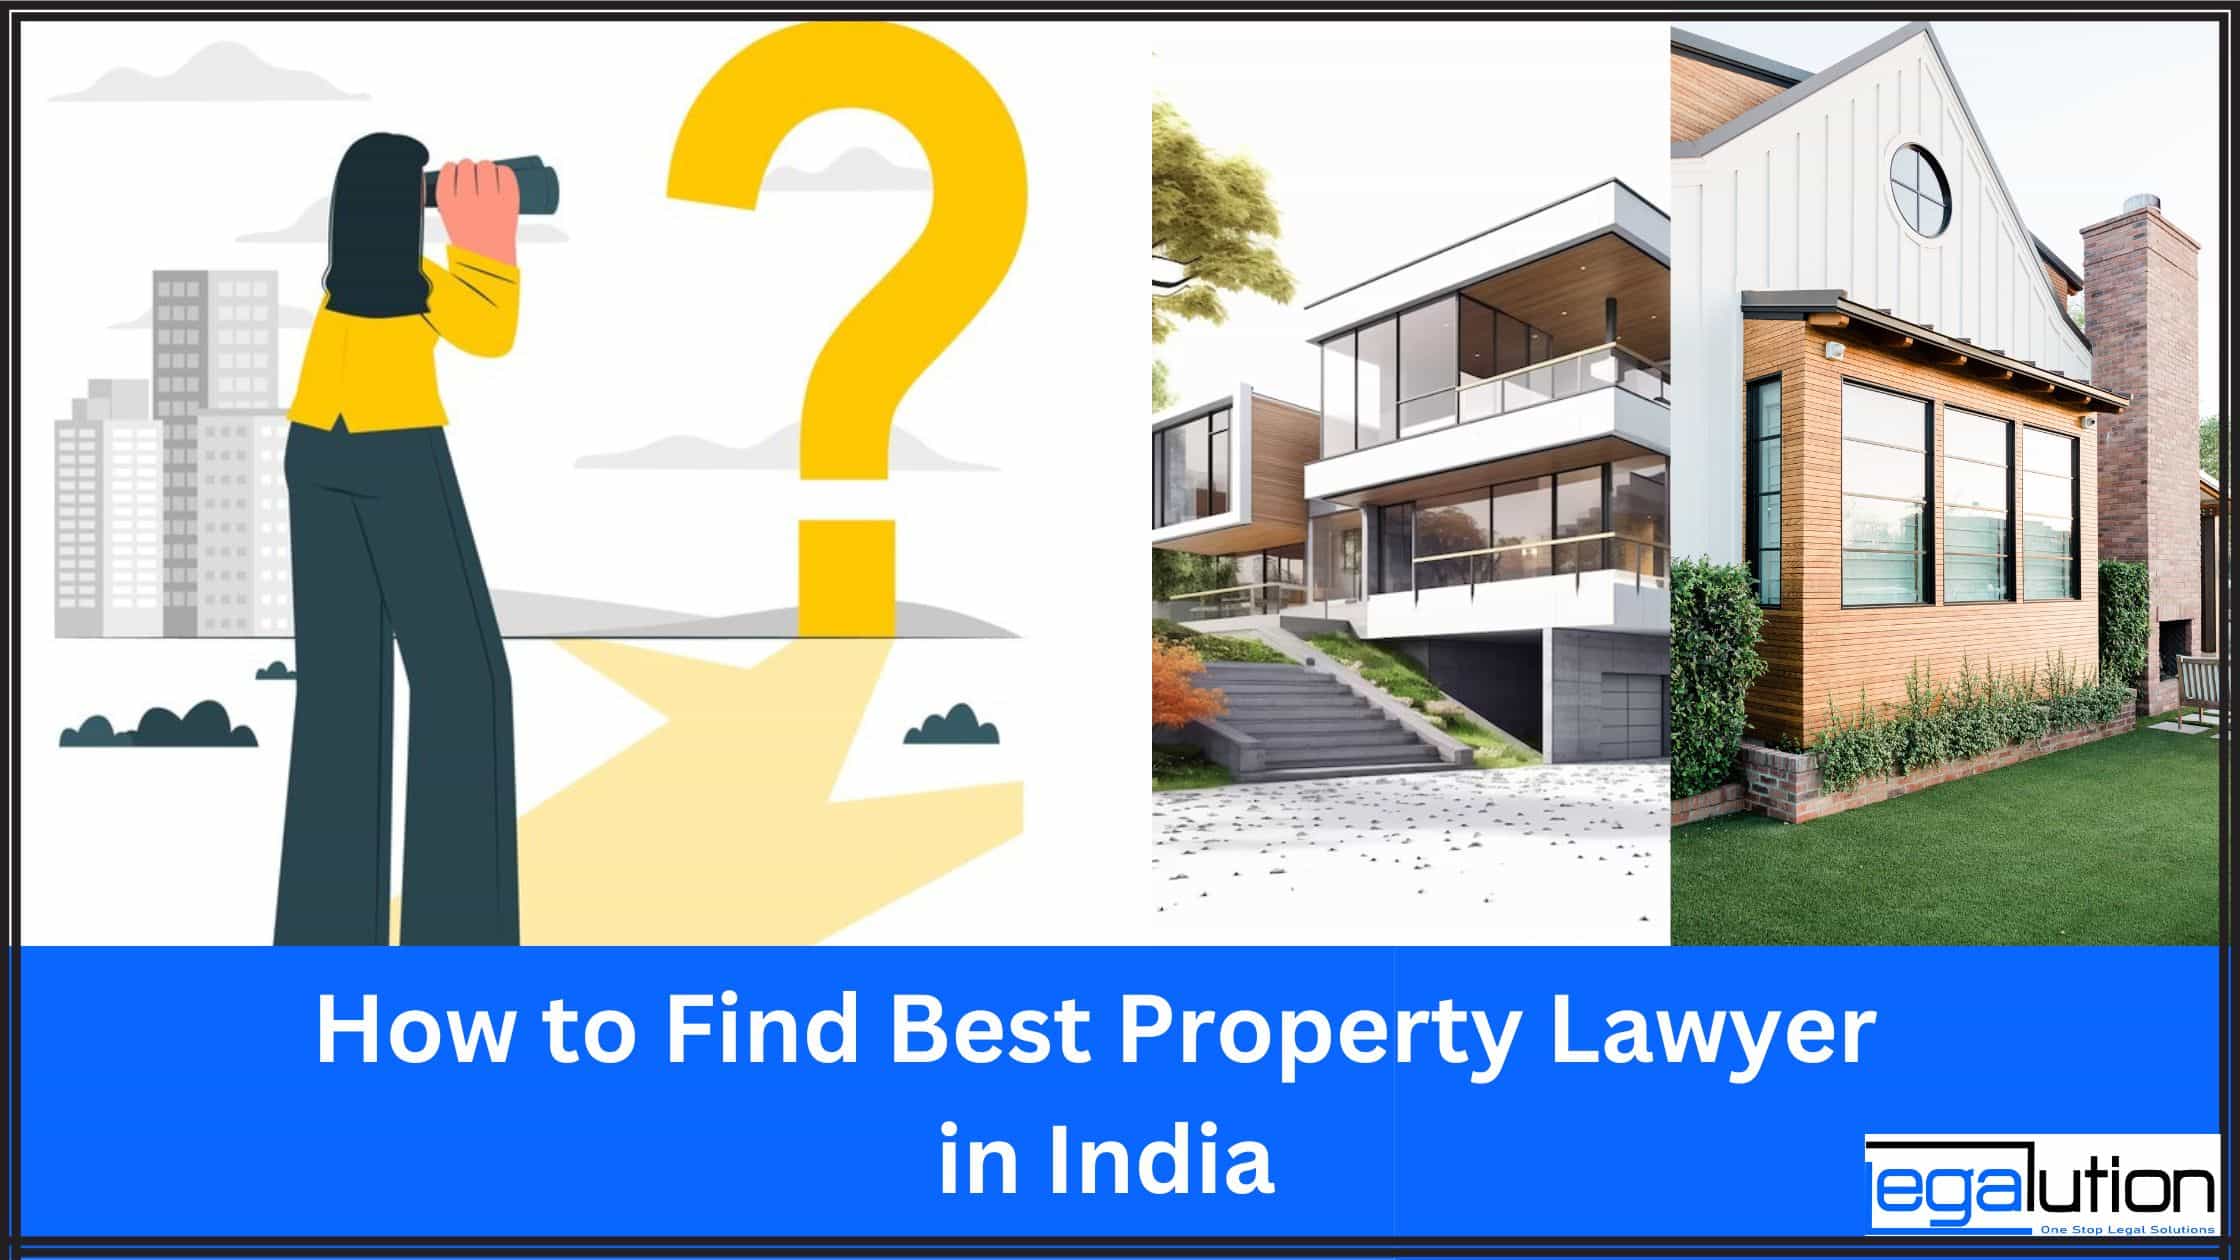 How to Find Best Property Lawyer in India